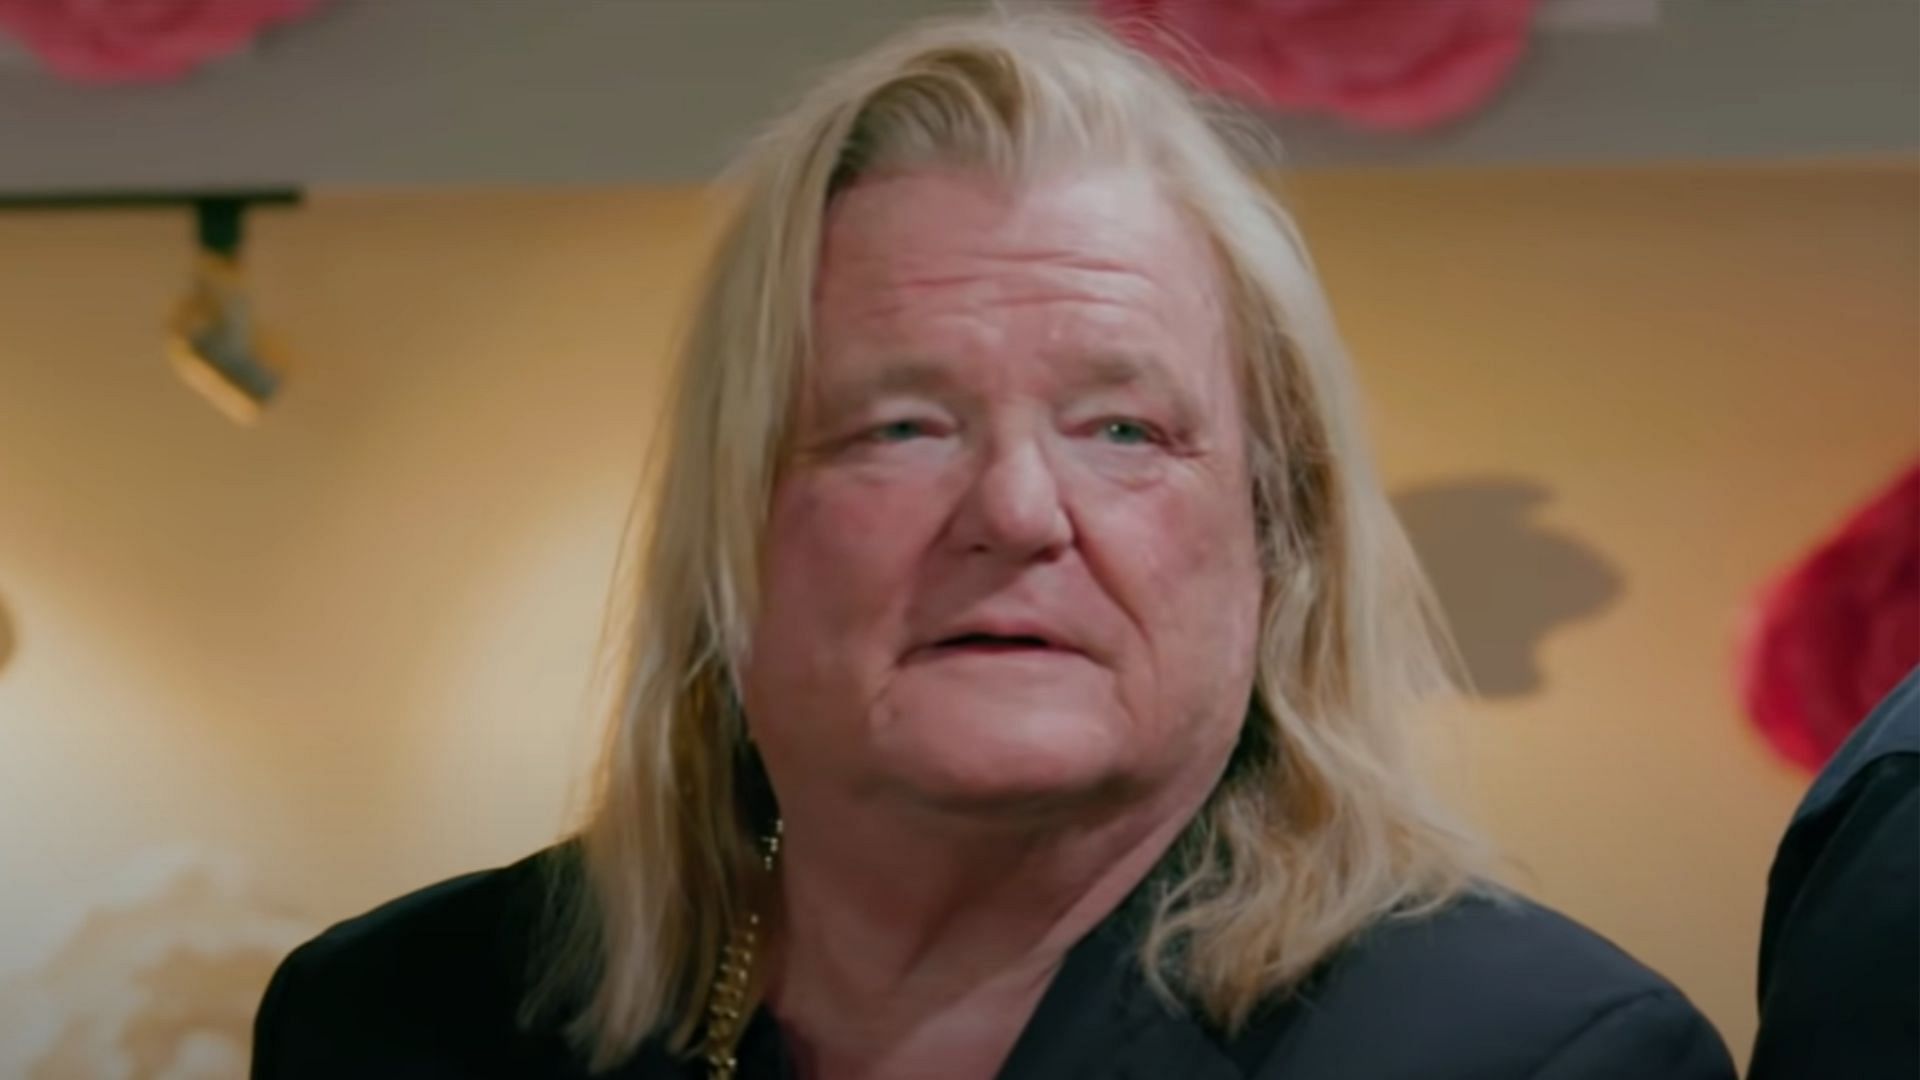 Greg Valentine was inducted into the WWE Hall of Fame in 2004